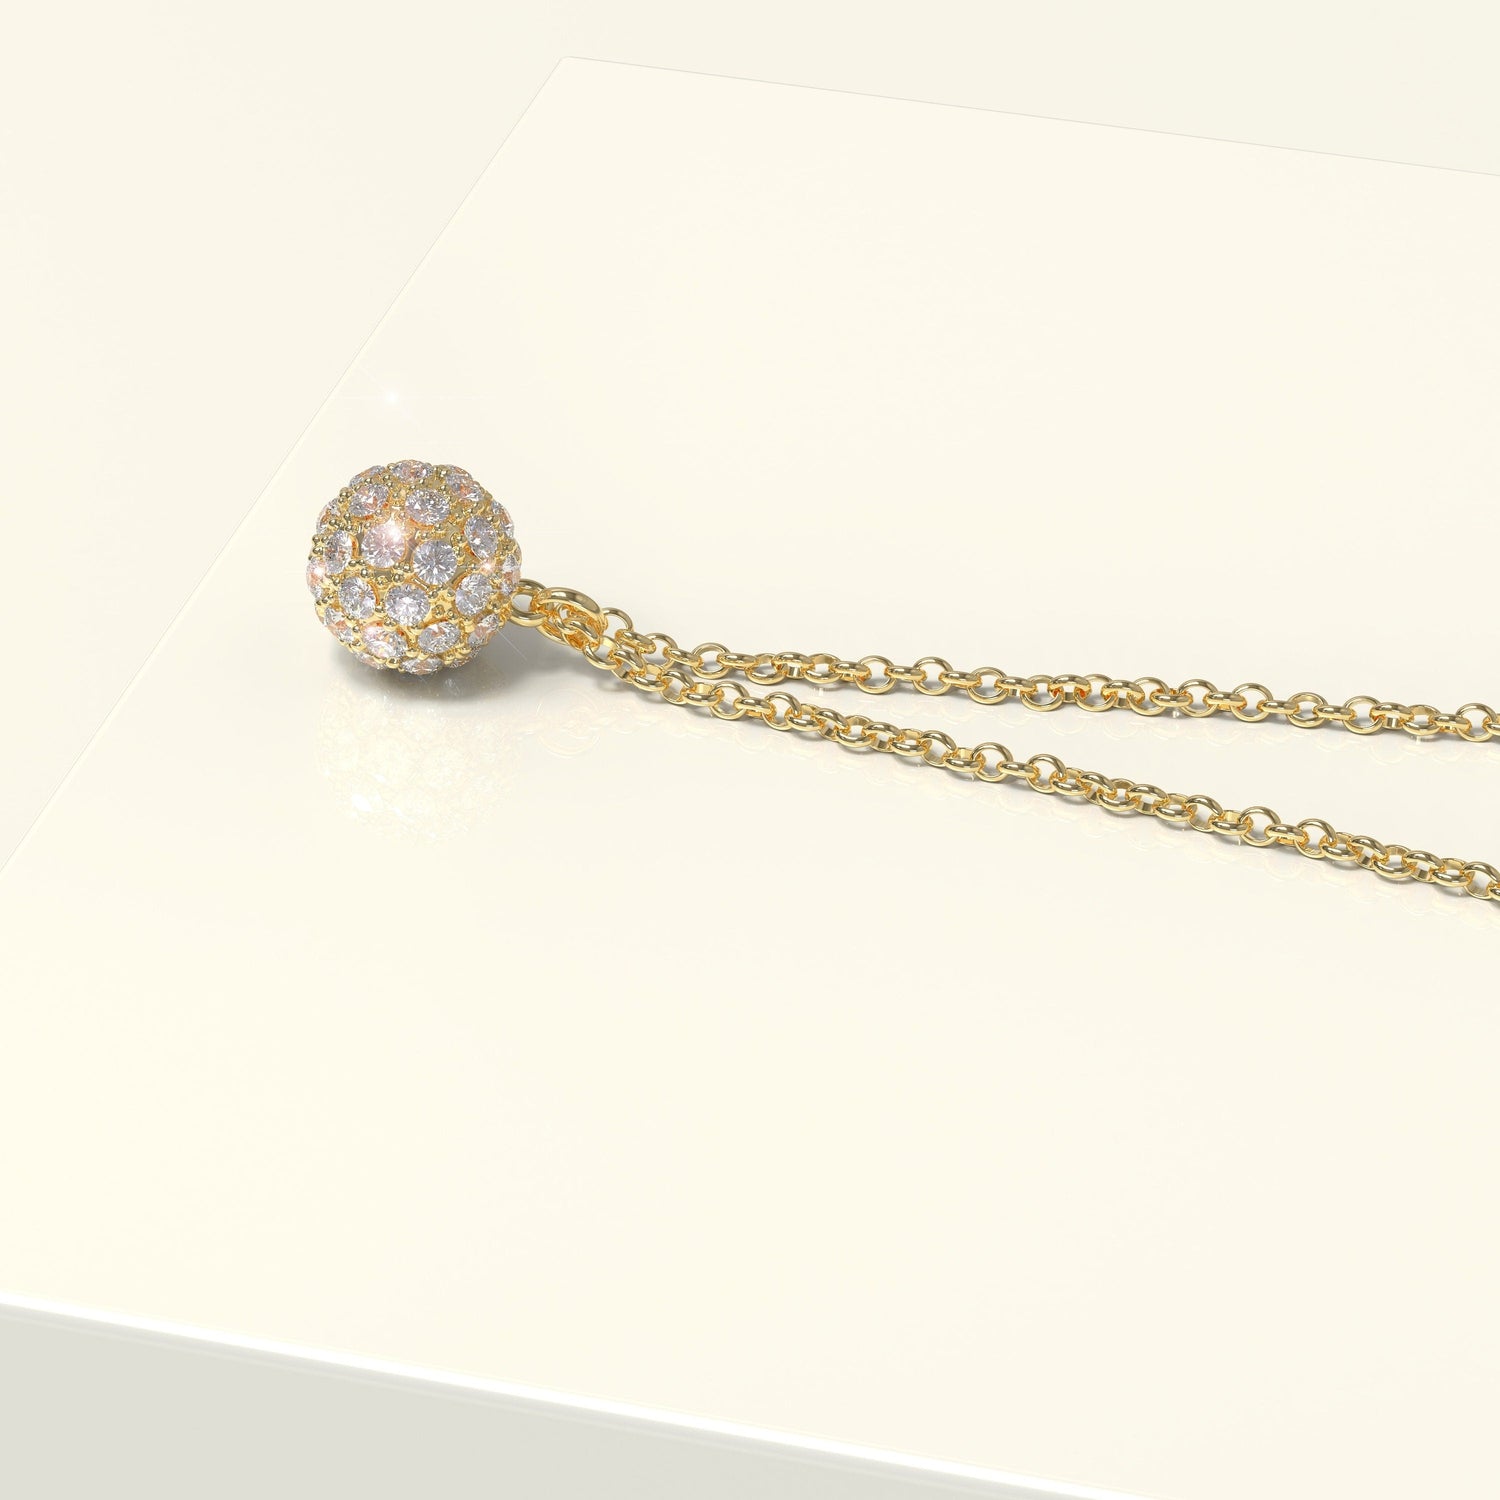 Pave Diamond Ball, Tiny Pave Diamond Ball, Diamond Necklace, Dainty Diamond Necklace, Solid Gold Diamond Necklace, Necklace, Gift for Her